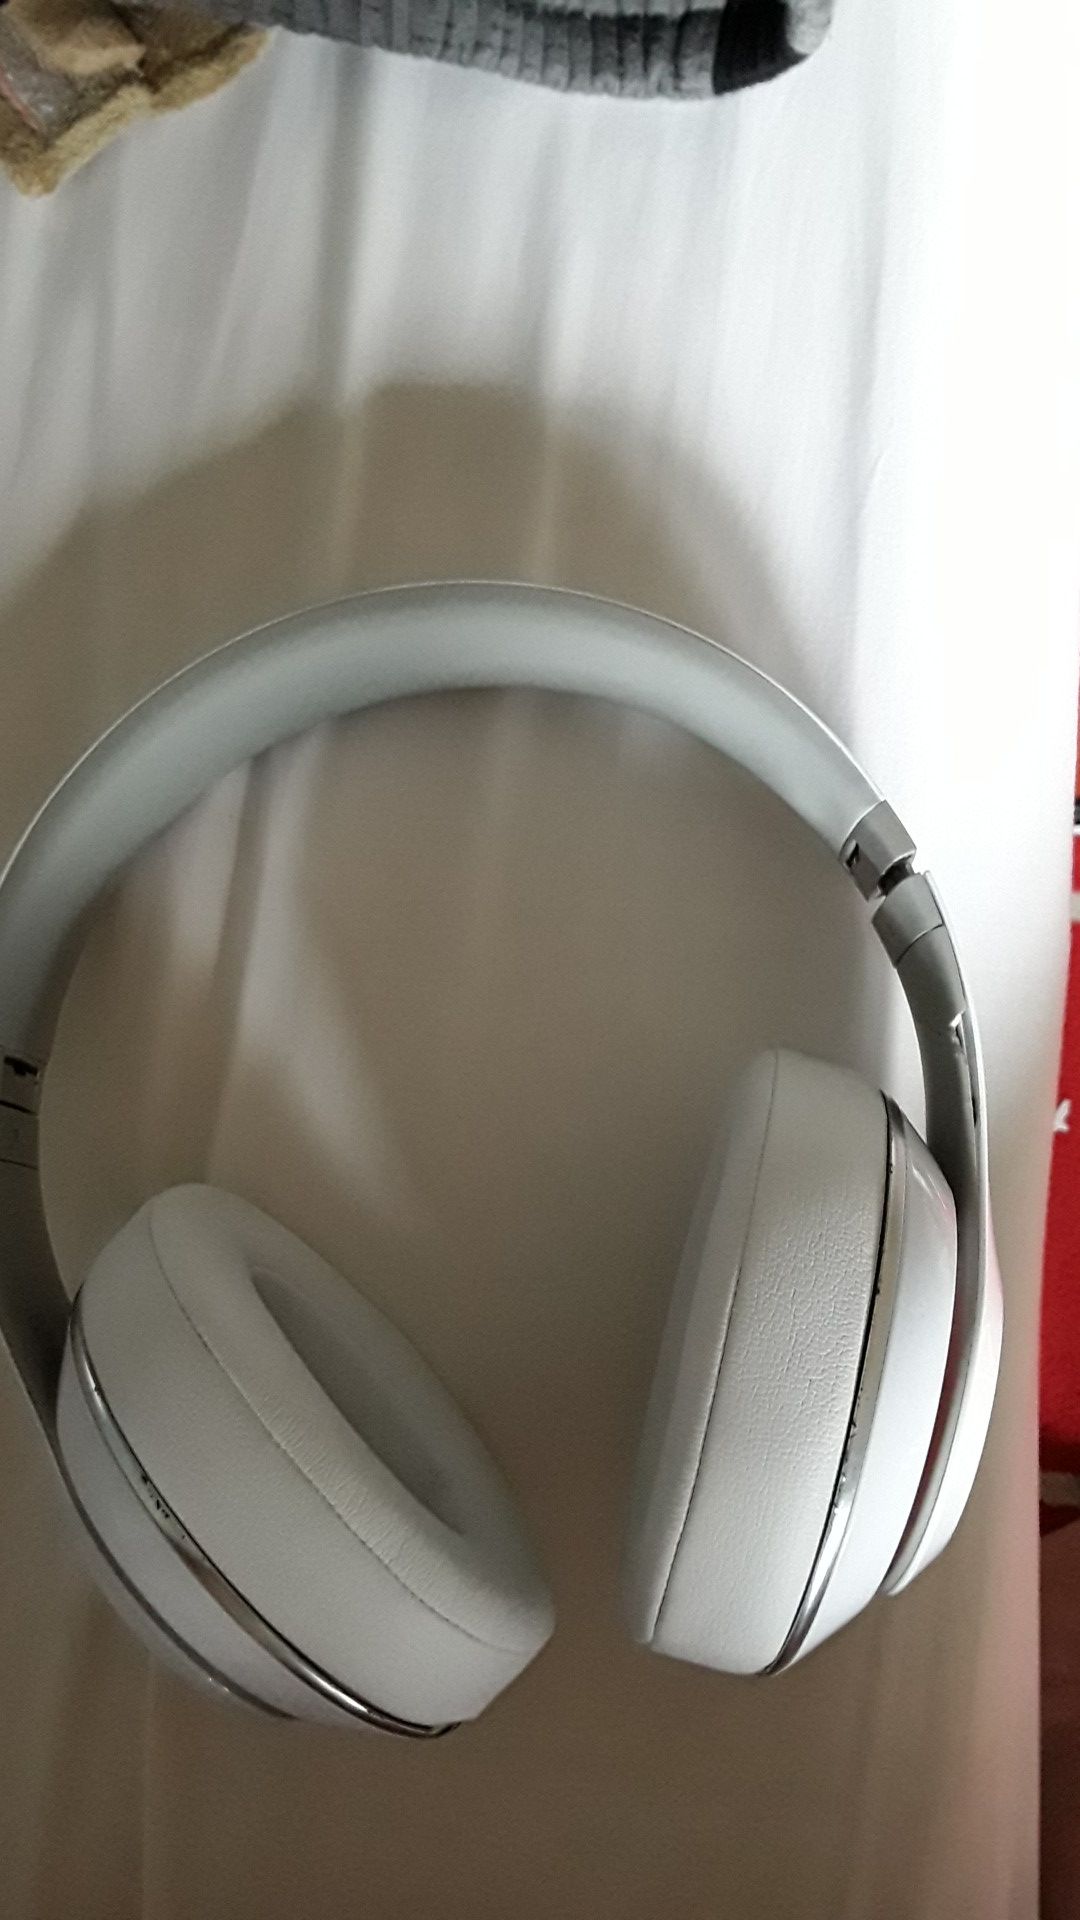 Brand new beats 2.0 wireless very willing to trade for good stuff